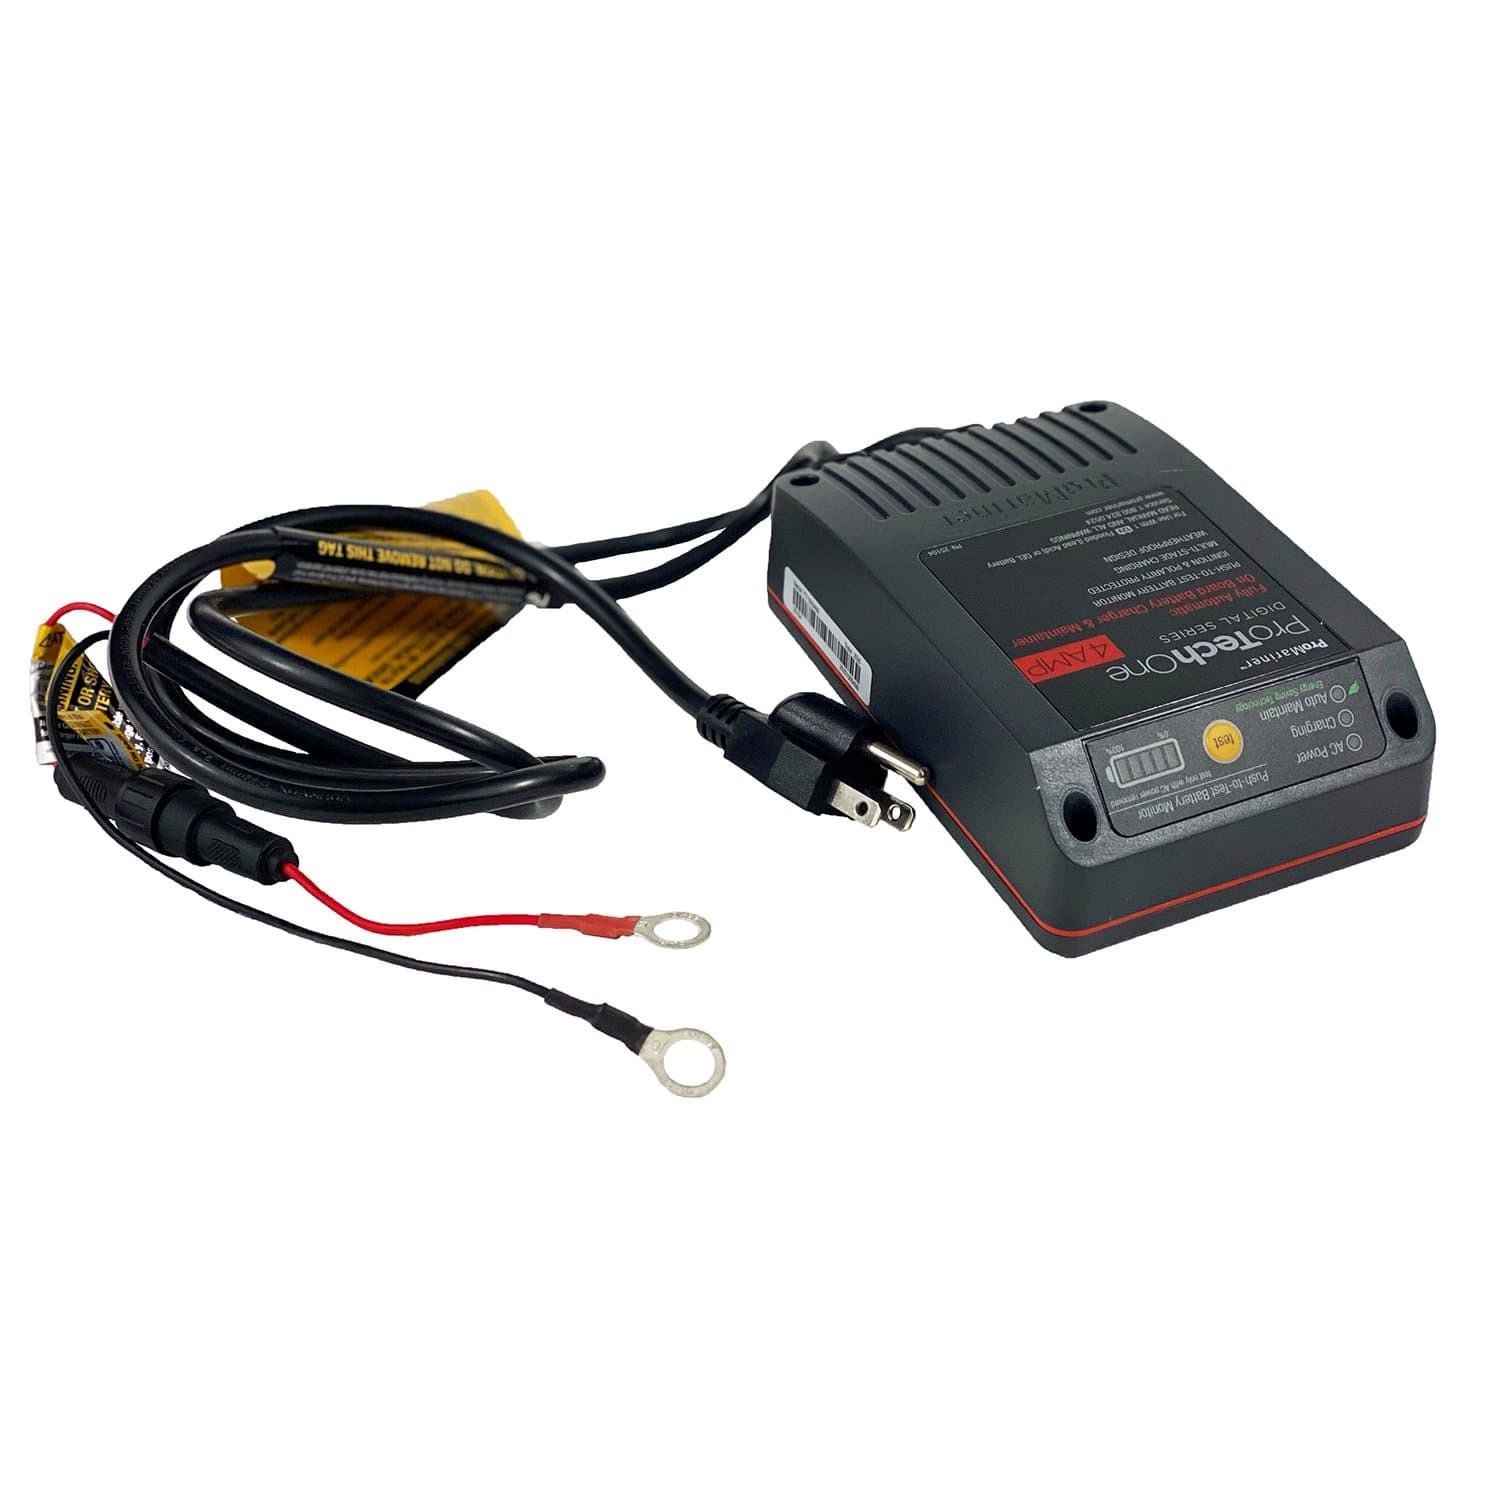 Marinco 25104 ProTech One Battery Charger